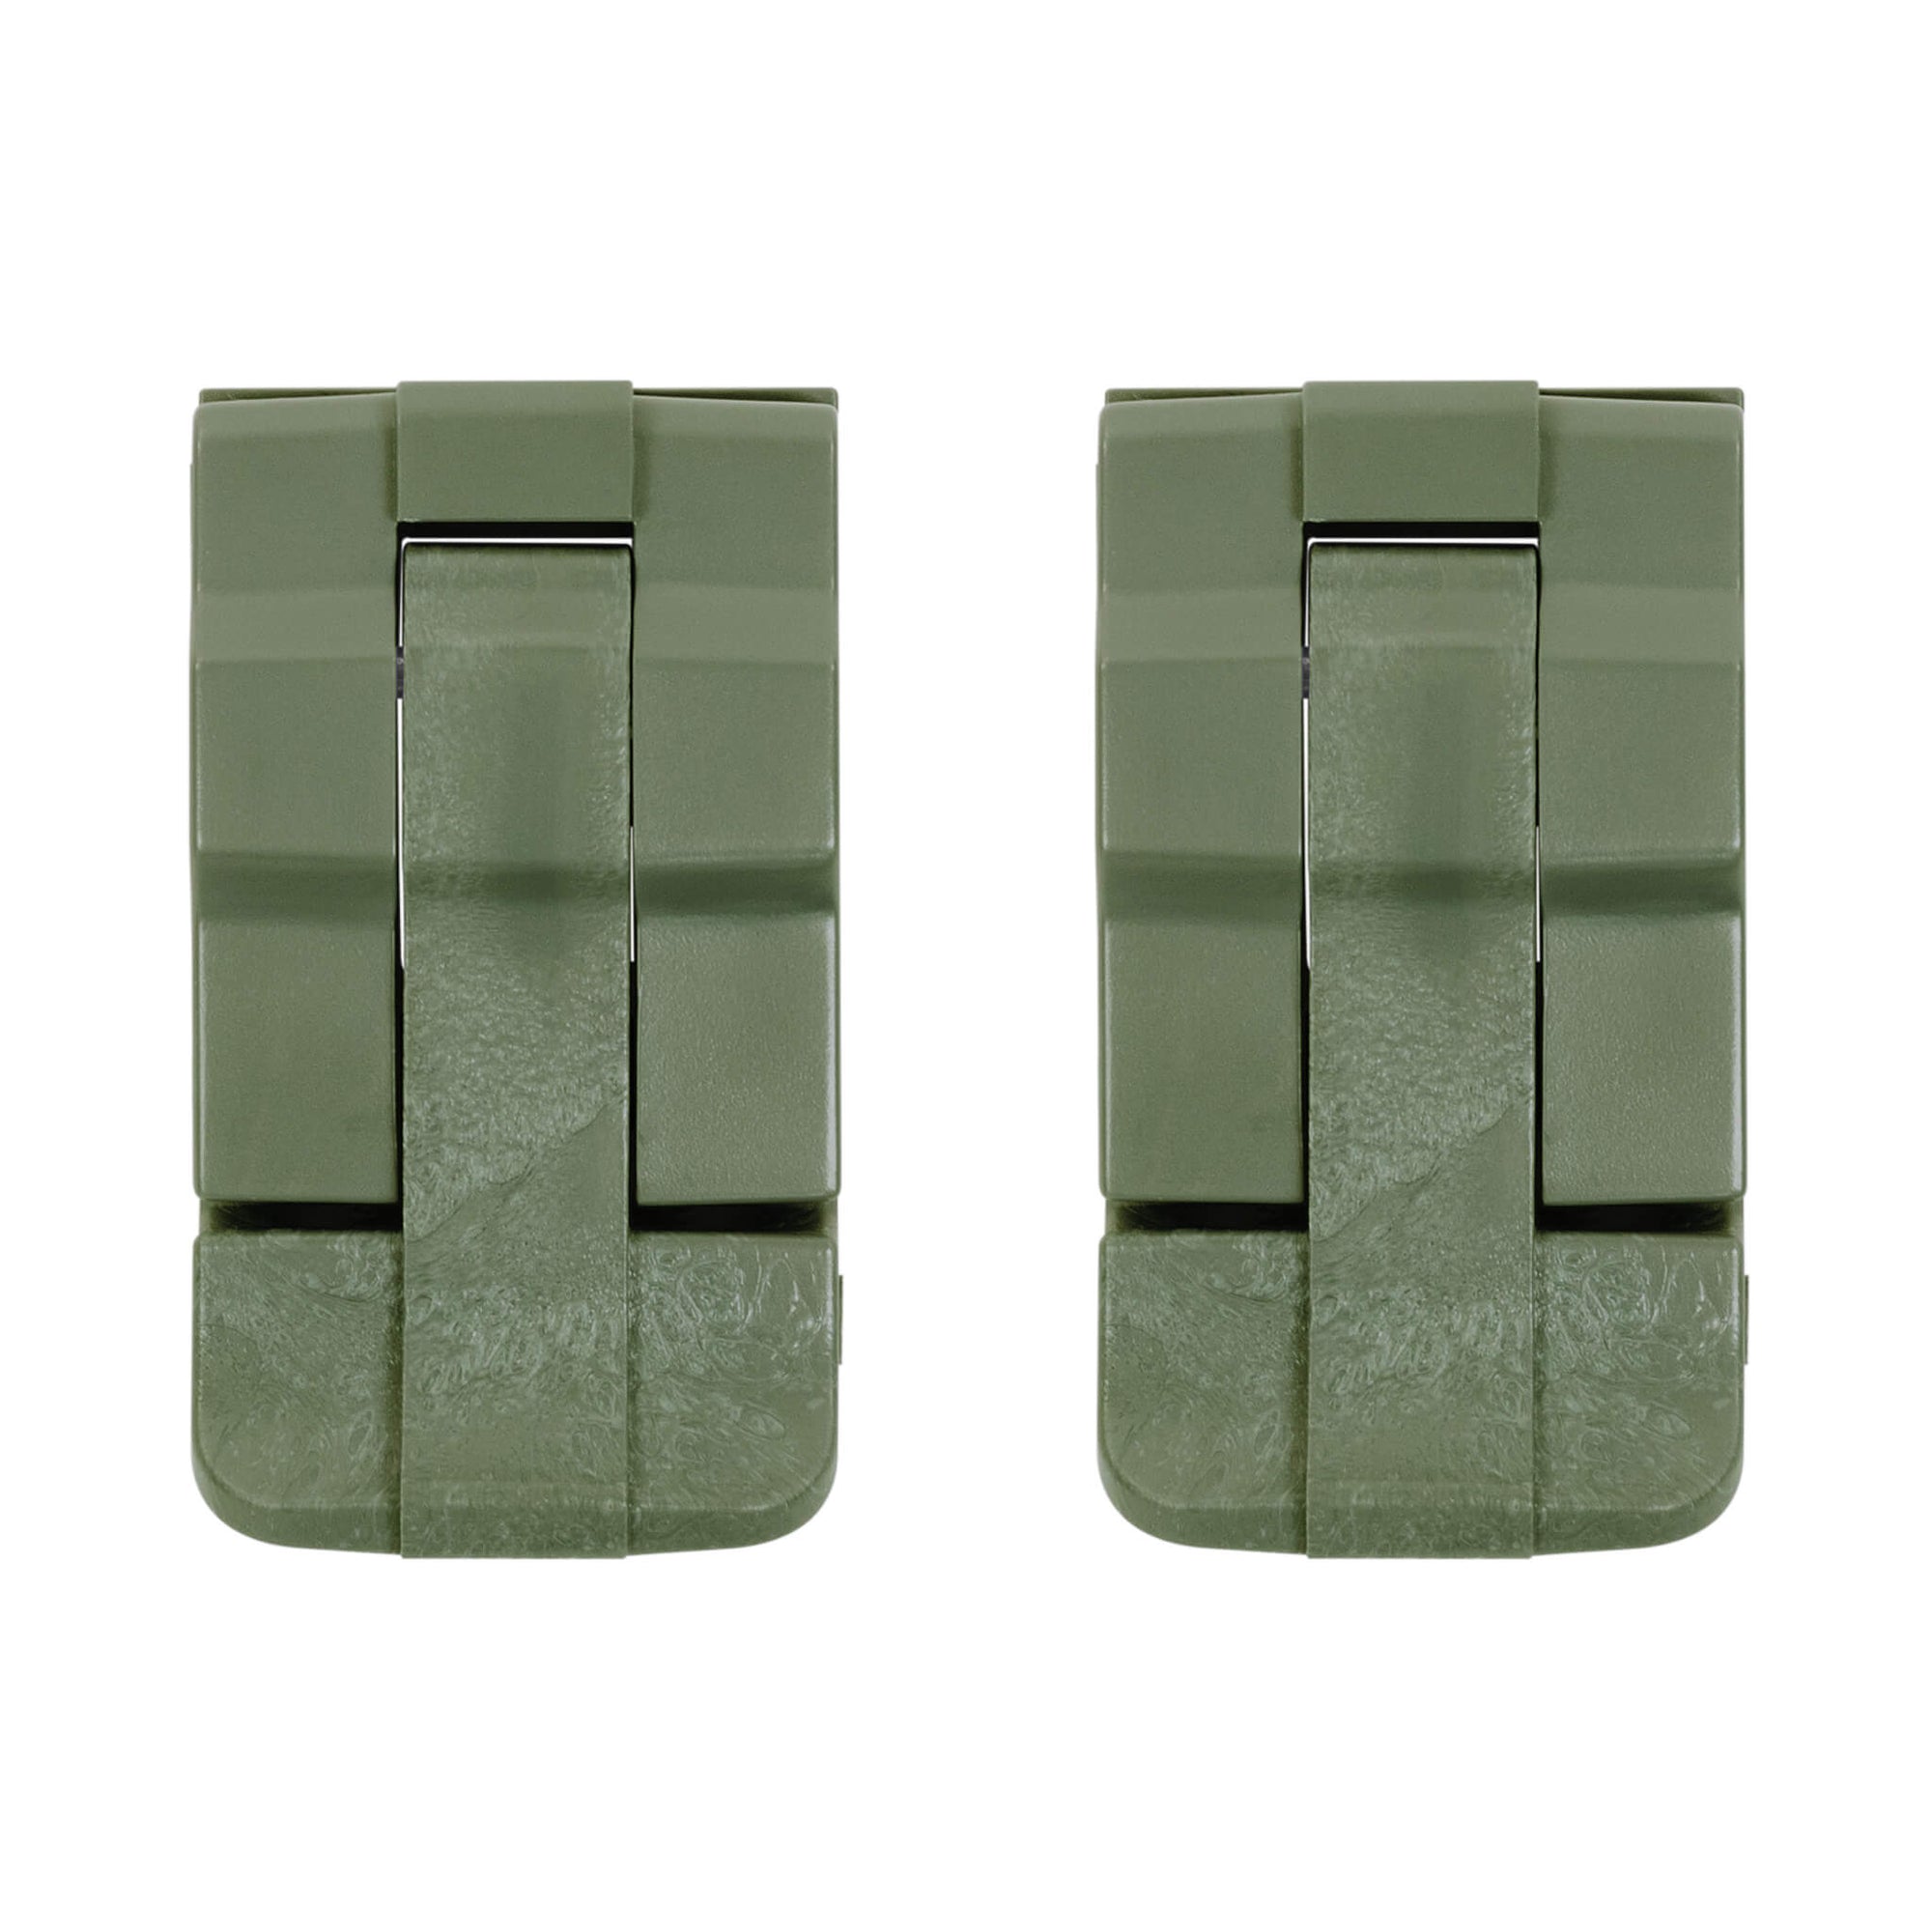 Pelican Replacement Latches, Medium, OD Green, Double-Throw (Set of 2) ColorCase 